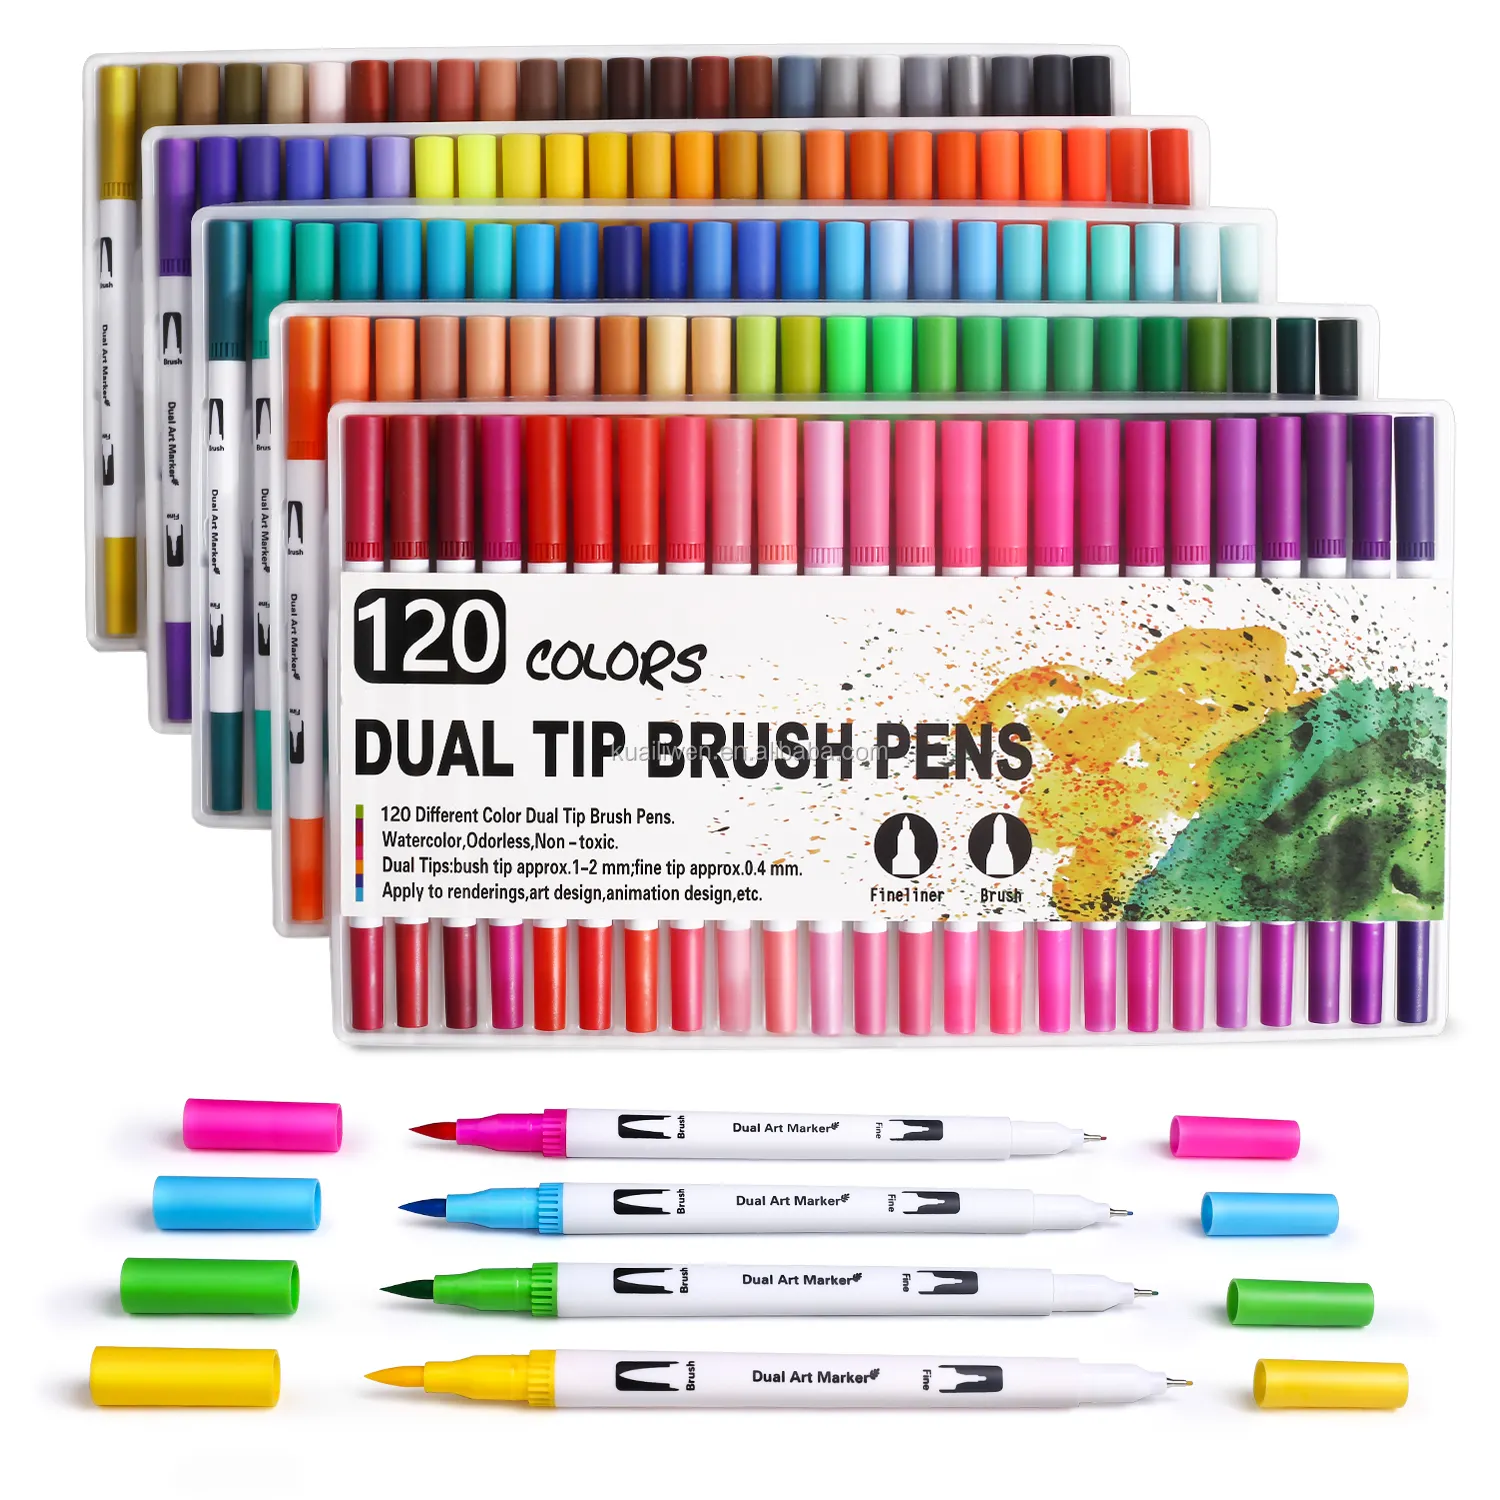 DUAL TIP Art Marker 0.4MM 120 Colors Fineliner Watercolor Brush Pen Set with Soft Brush&Bullet Point Tip for Drawing Fine line